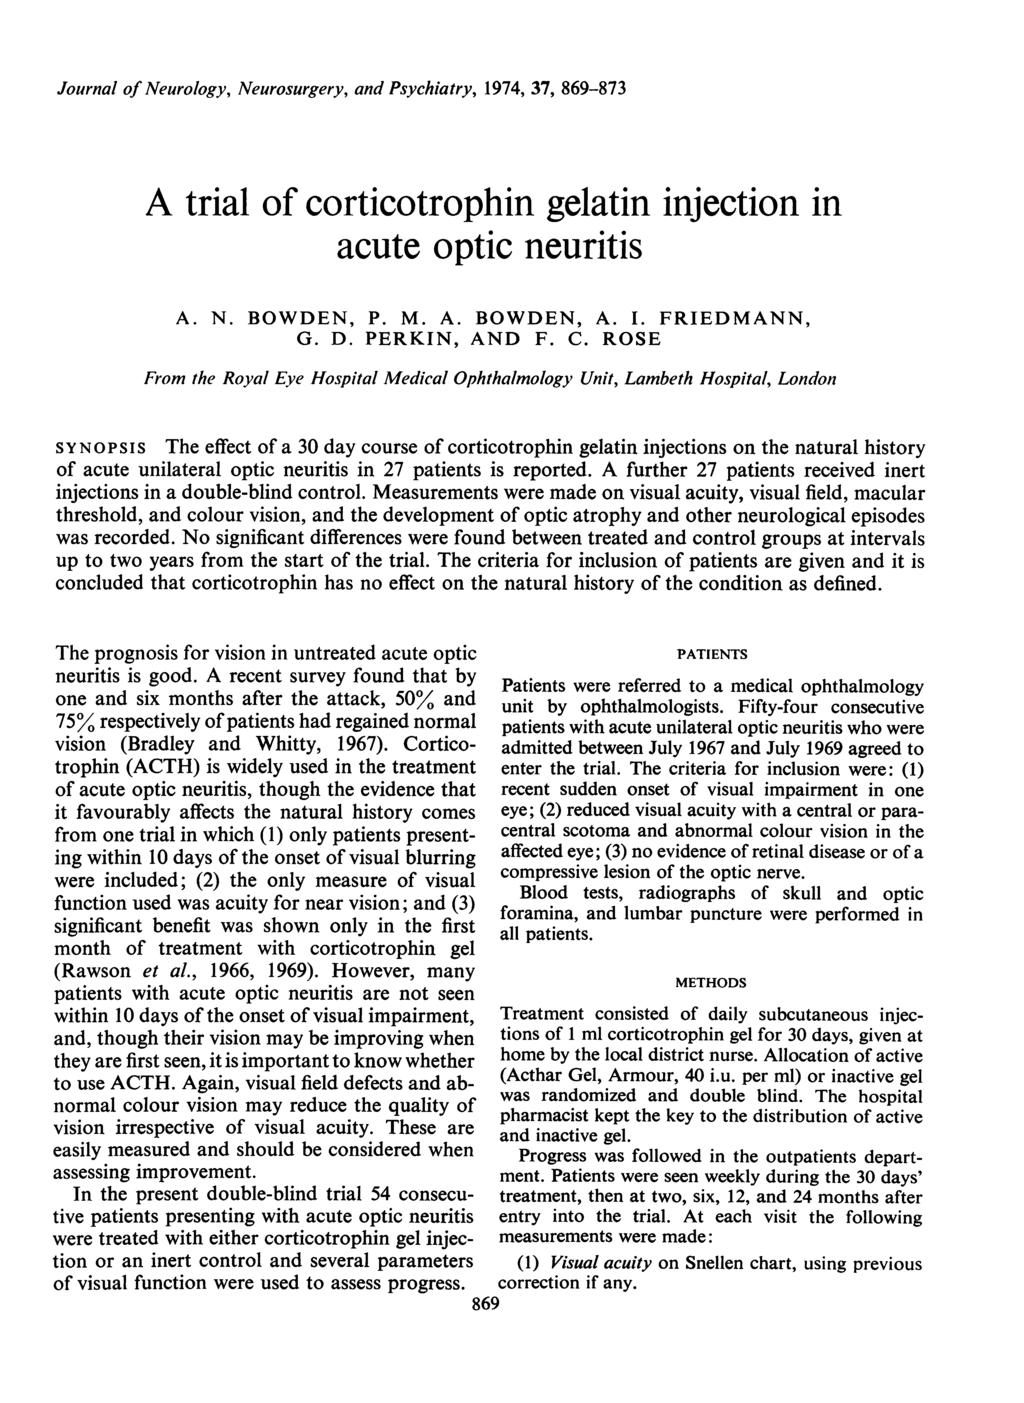 Journal of Neurology, Neurosurgery, and Psychiatry, 1974, 37, 869-873 A trial of corticotrophin gelatin injection in acute optic neuritis A. N. BOWDEN, P. M. A. BOWDEN, A. I. FRIEDMANN, G. D.